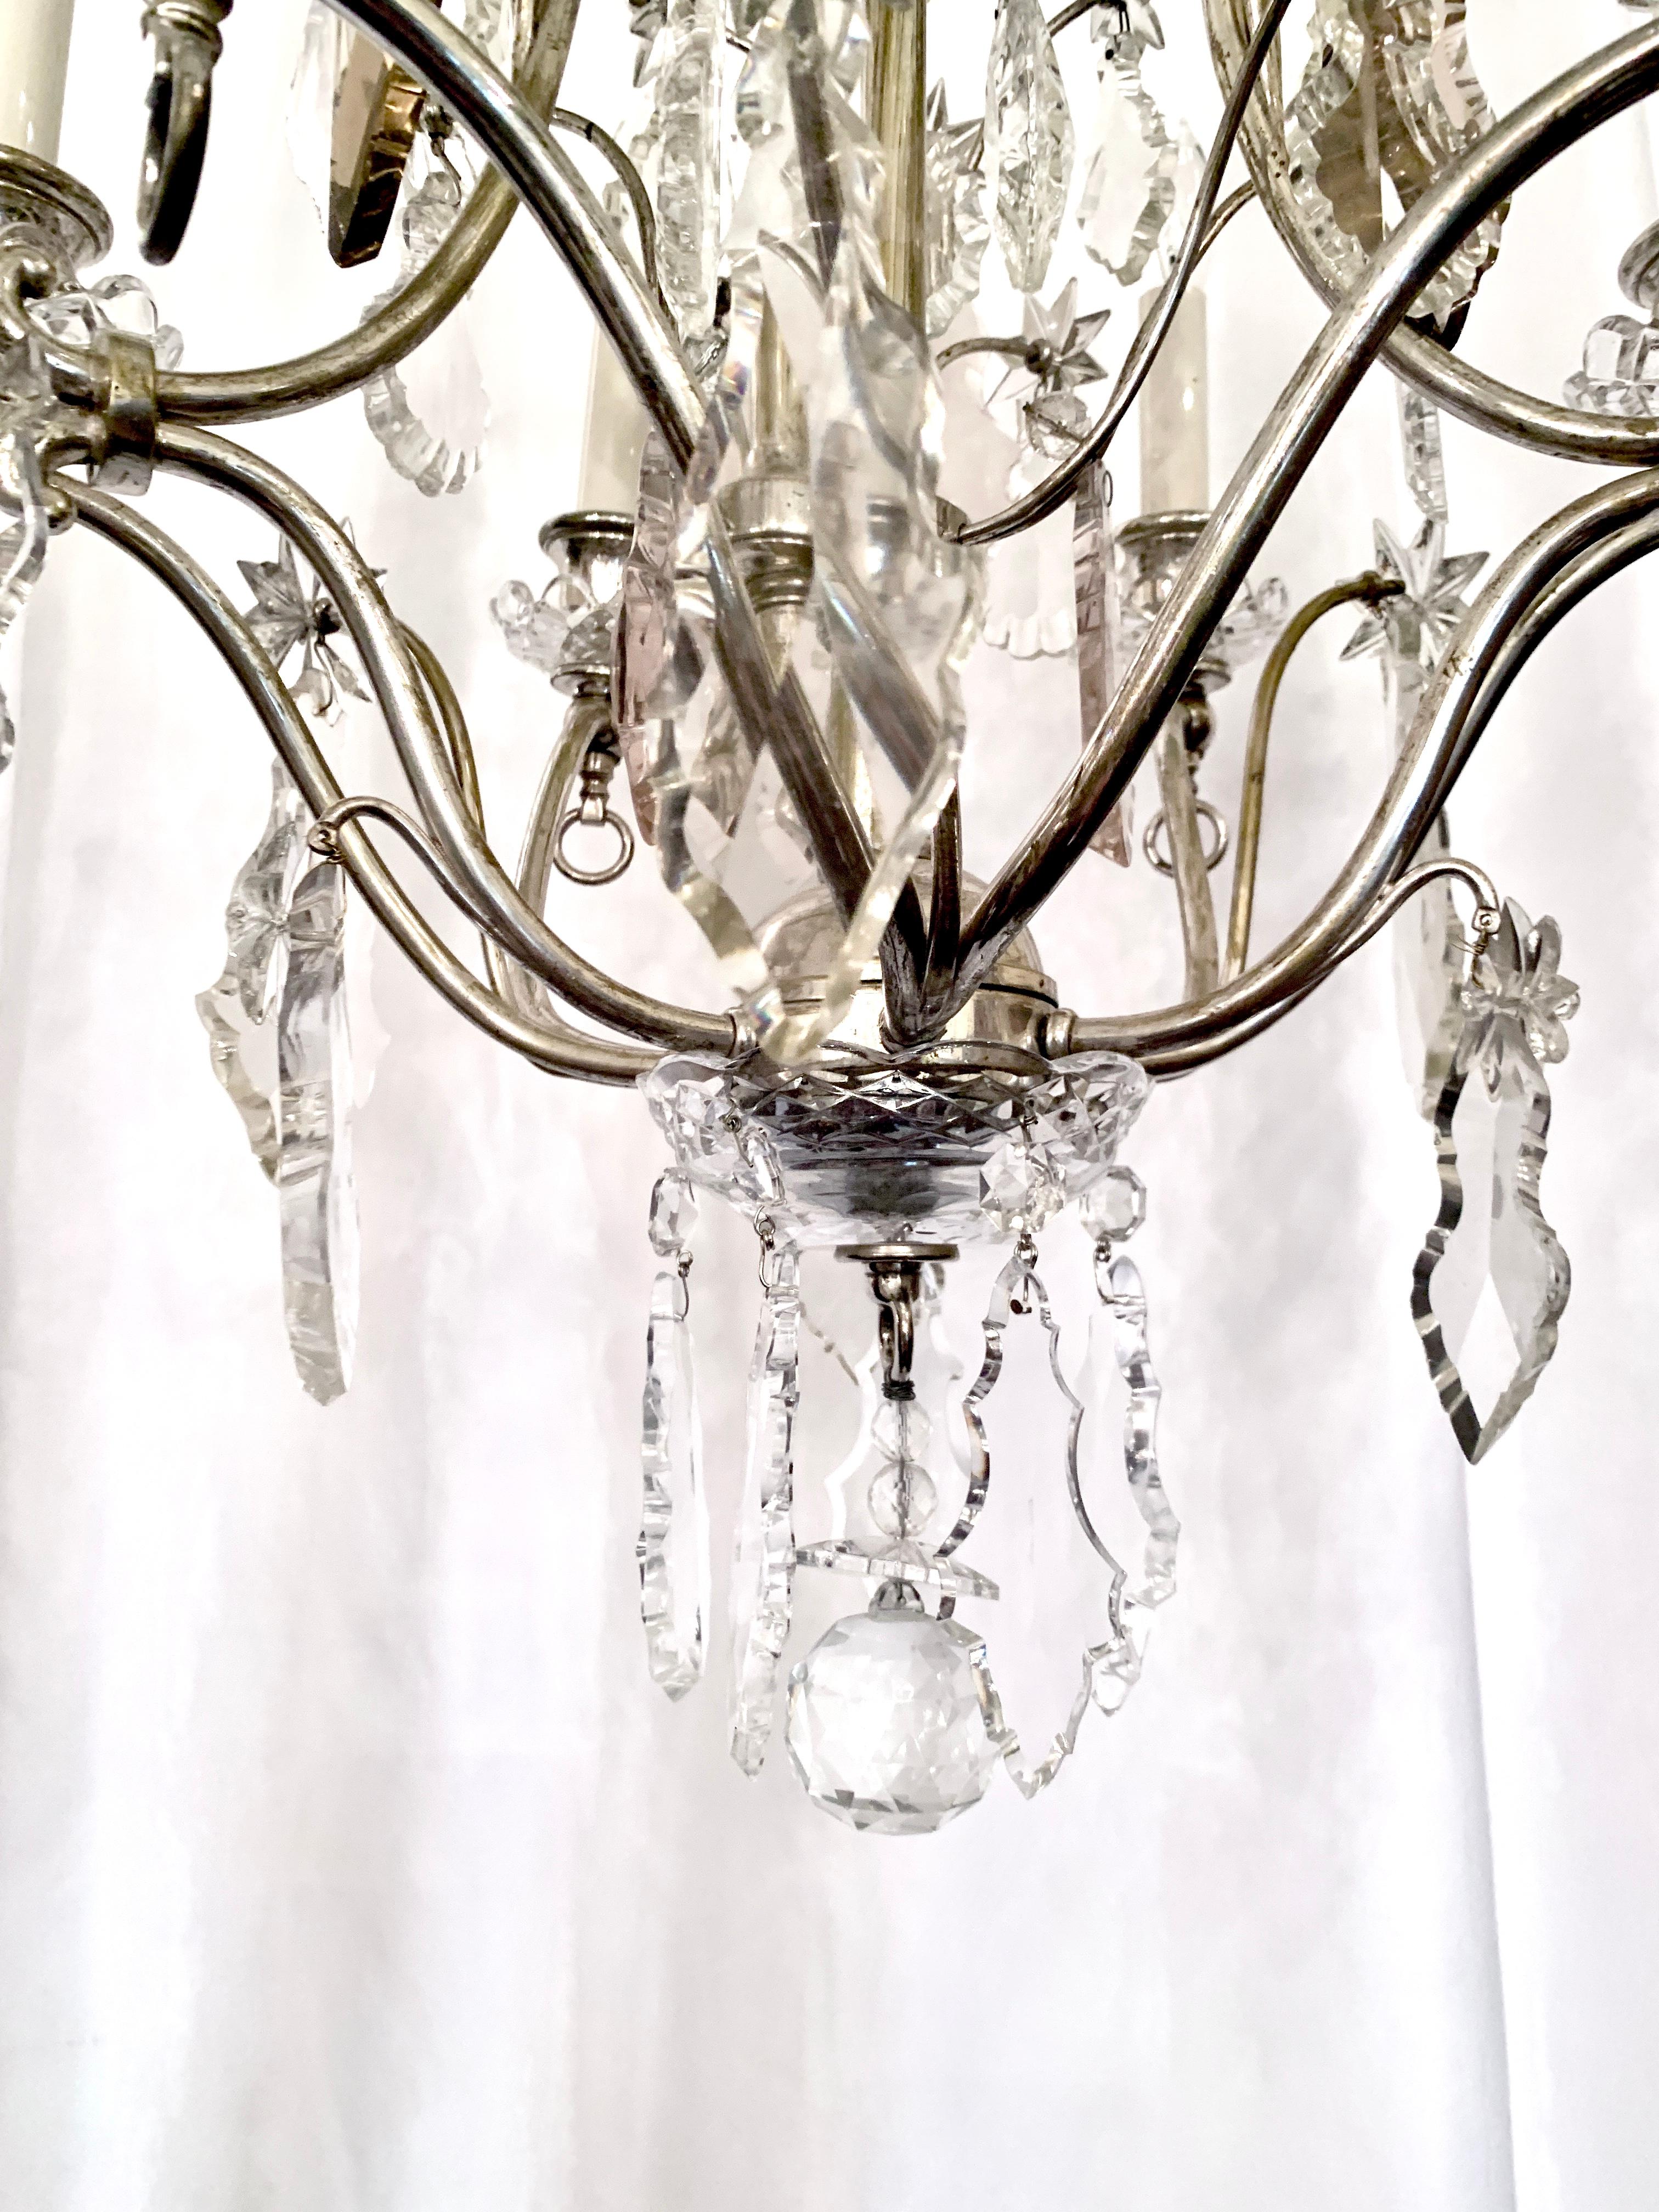 Antique French Baccarat Crystal Silvered Bronze Chandelier, Circa 1900-1920 In Good Condition For Sale In New Orleans, LA